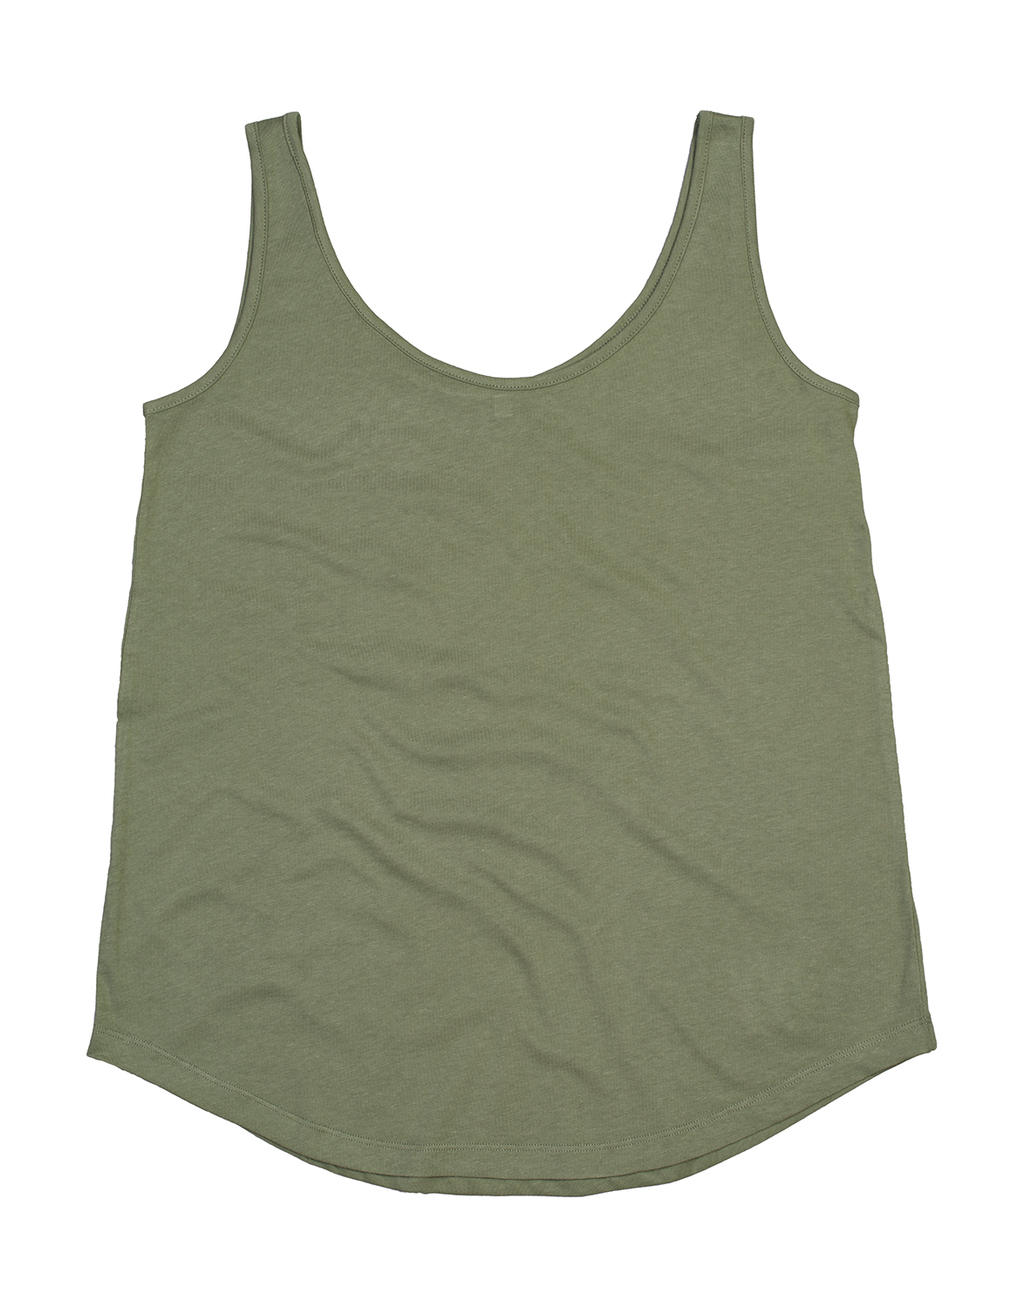  Ladies Loose Fit Vest in Farbe Soft Olive